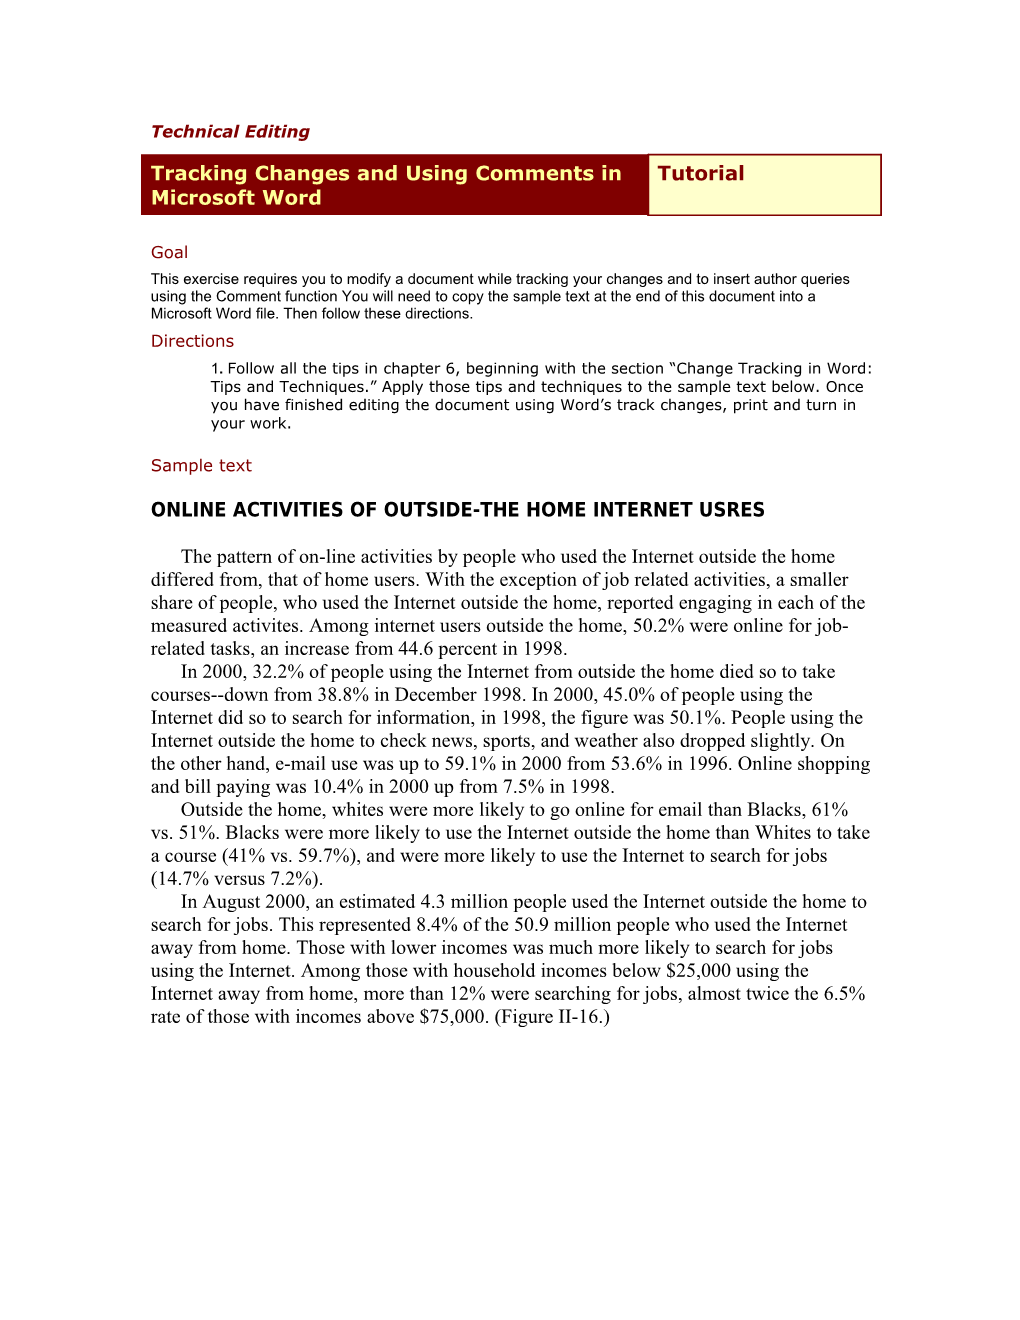 Online Activities of Outside-The Home Internet Usres